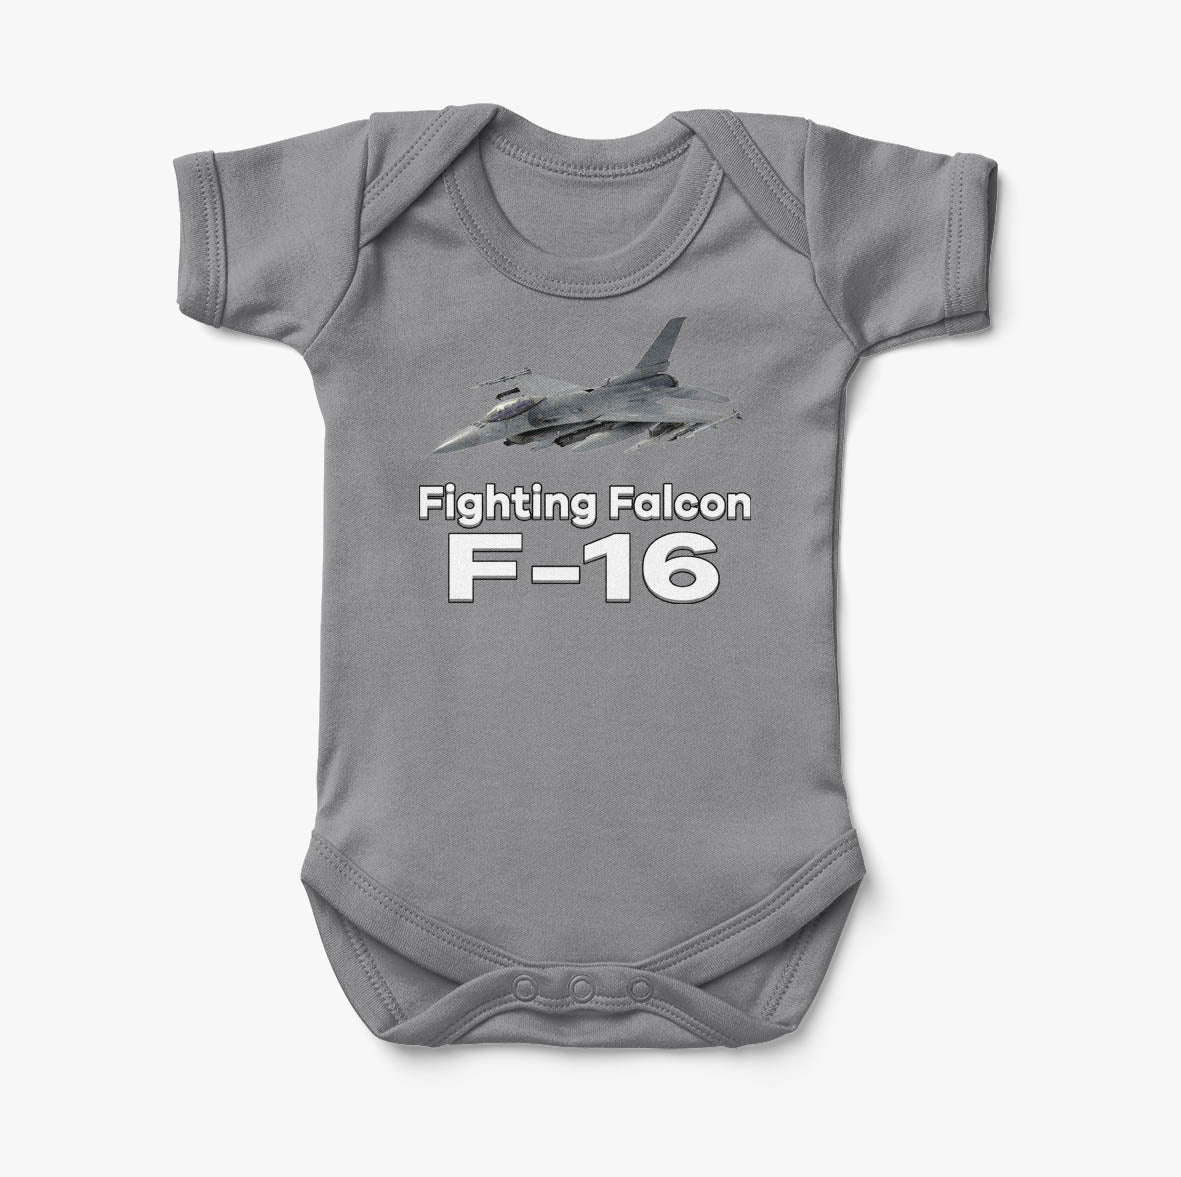 The Fighting Falcon F16 Designed Baby Bodysuits